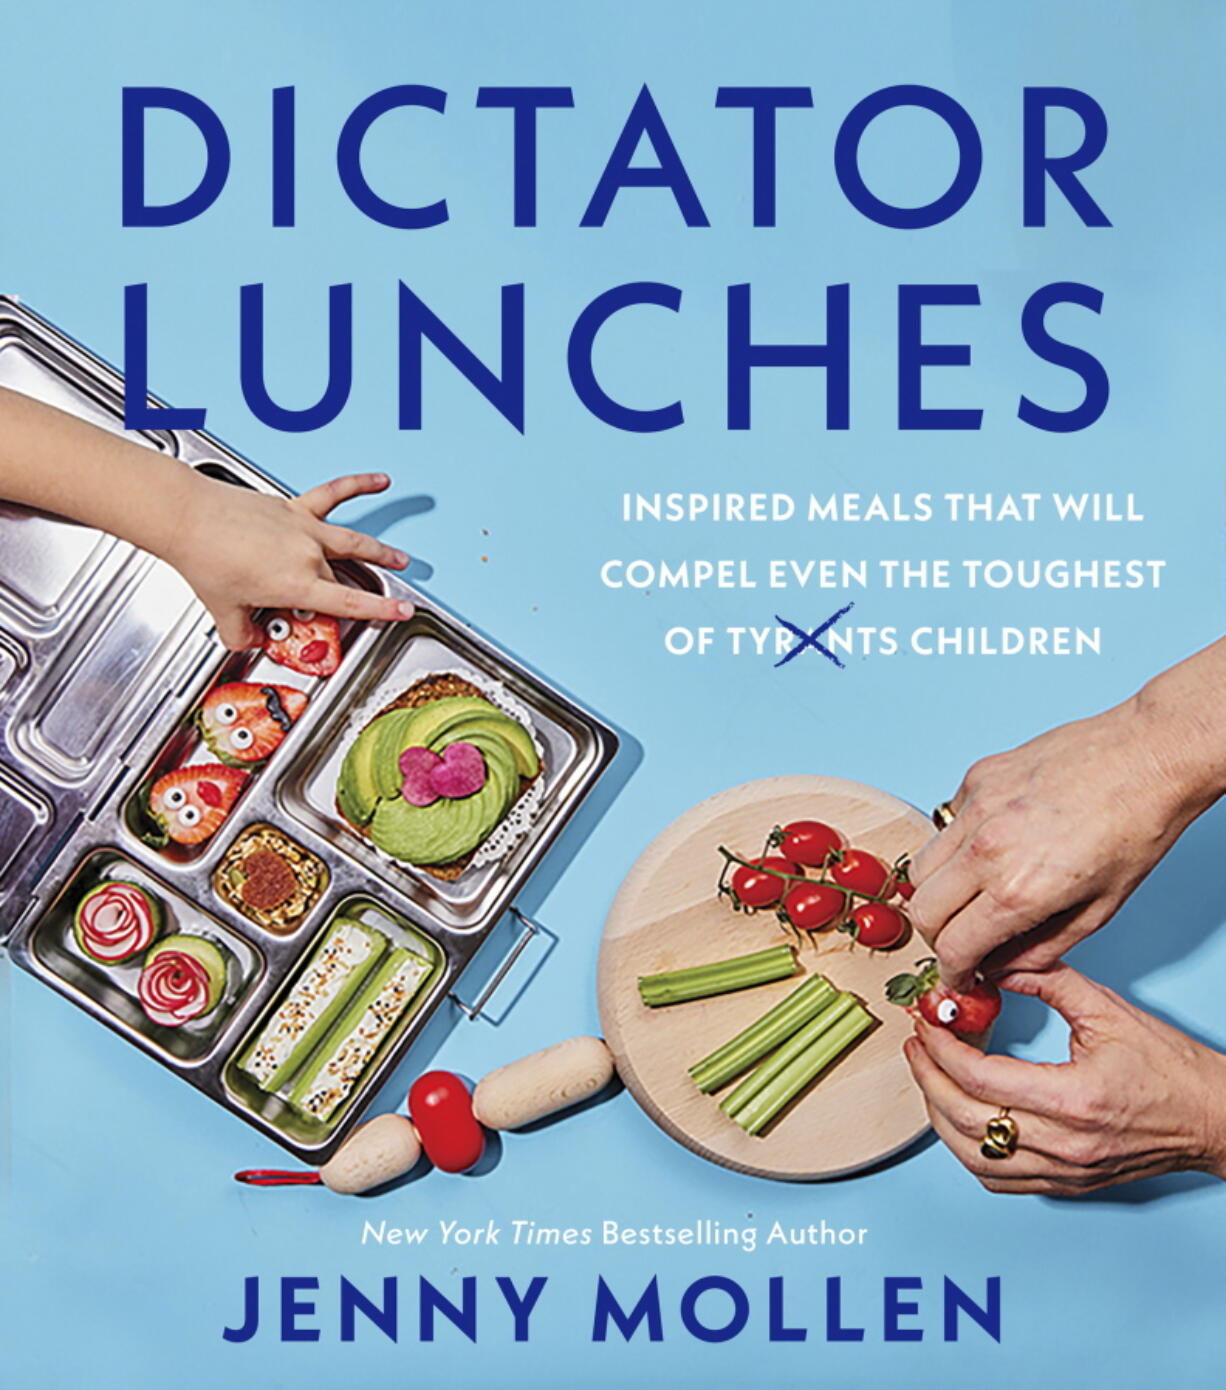 This cover image released by Harvest shows "Dictator Lunches: Inspired Meals That Will Compel Even the Toughest of Children" by Jenny Mollen.